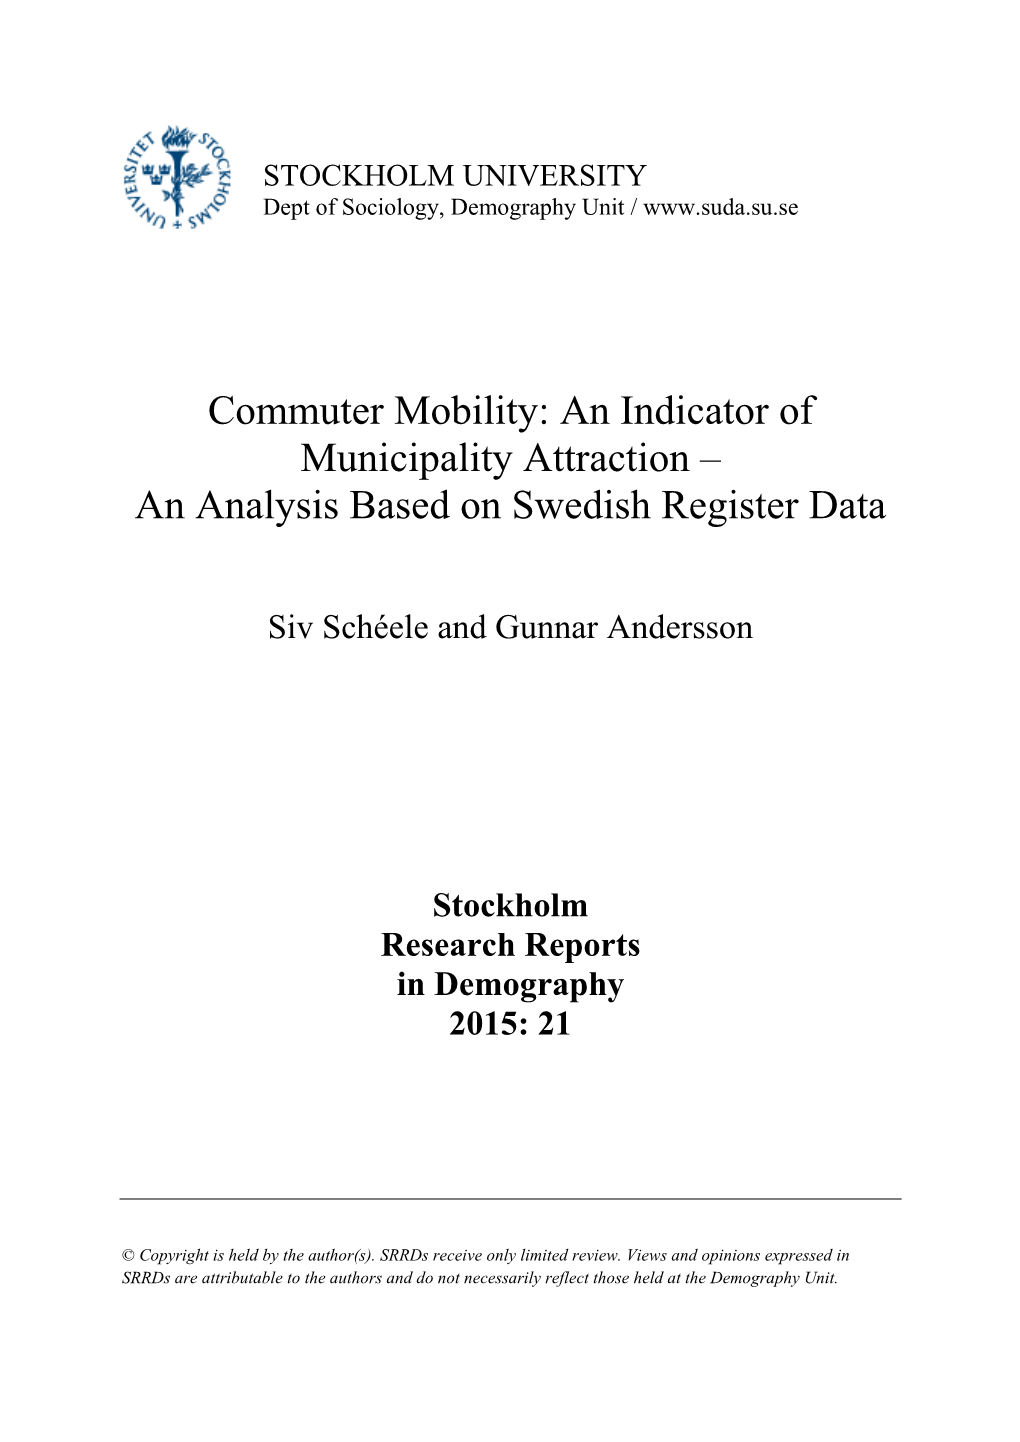 Commuter Mobility: an Indicator of Municipality Attraction – an Analysis Based on Swedish Register Data